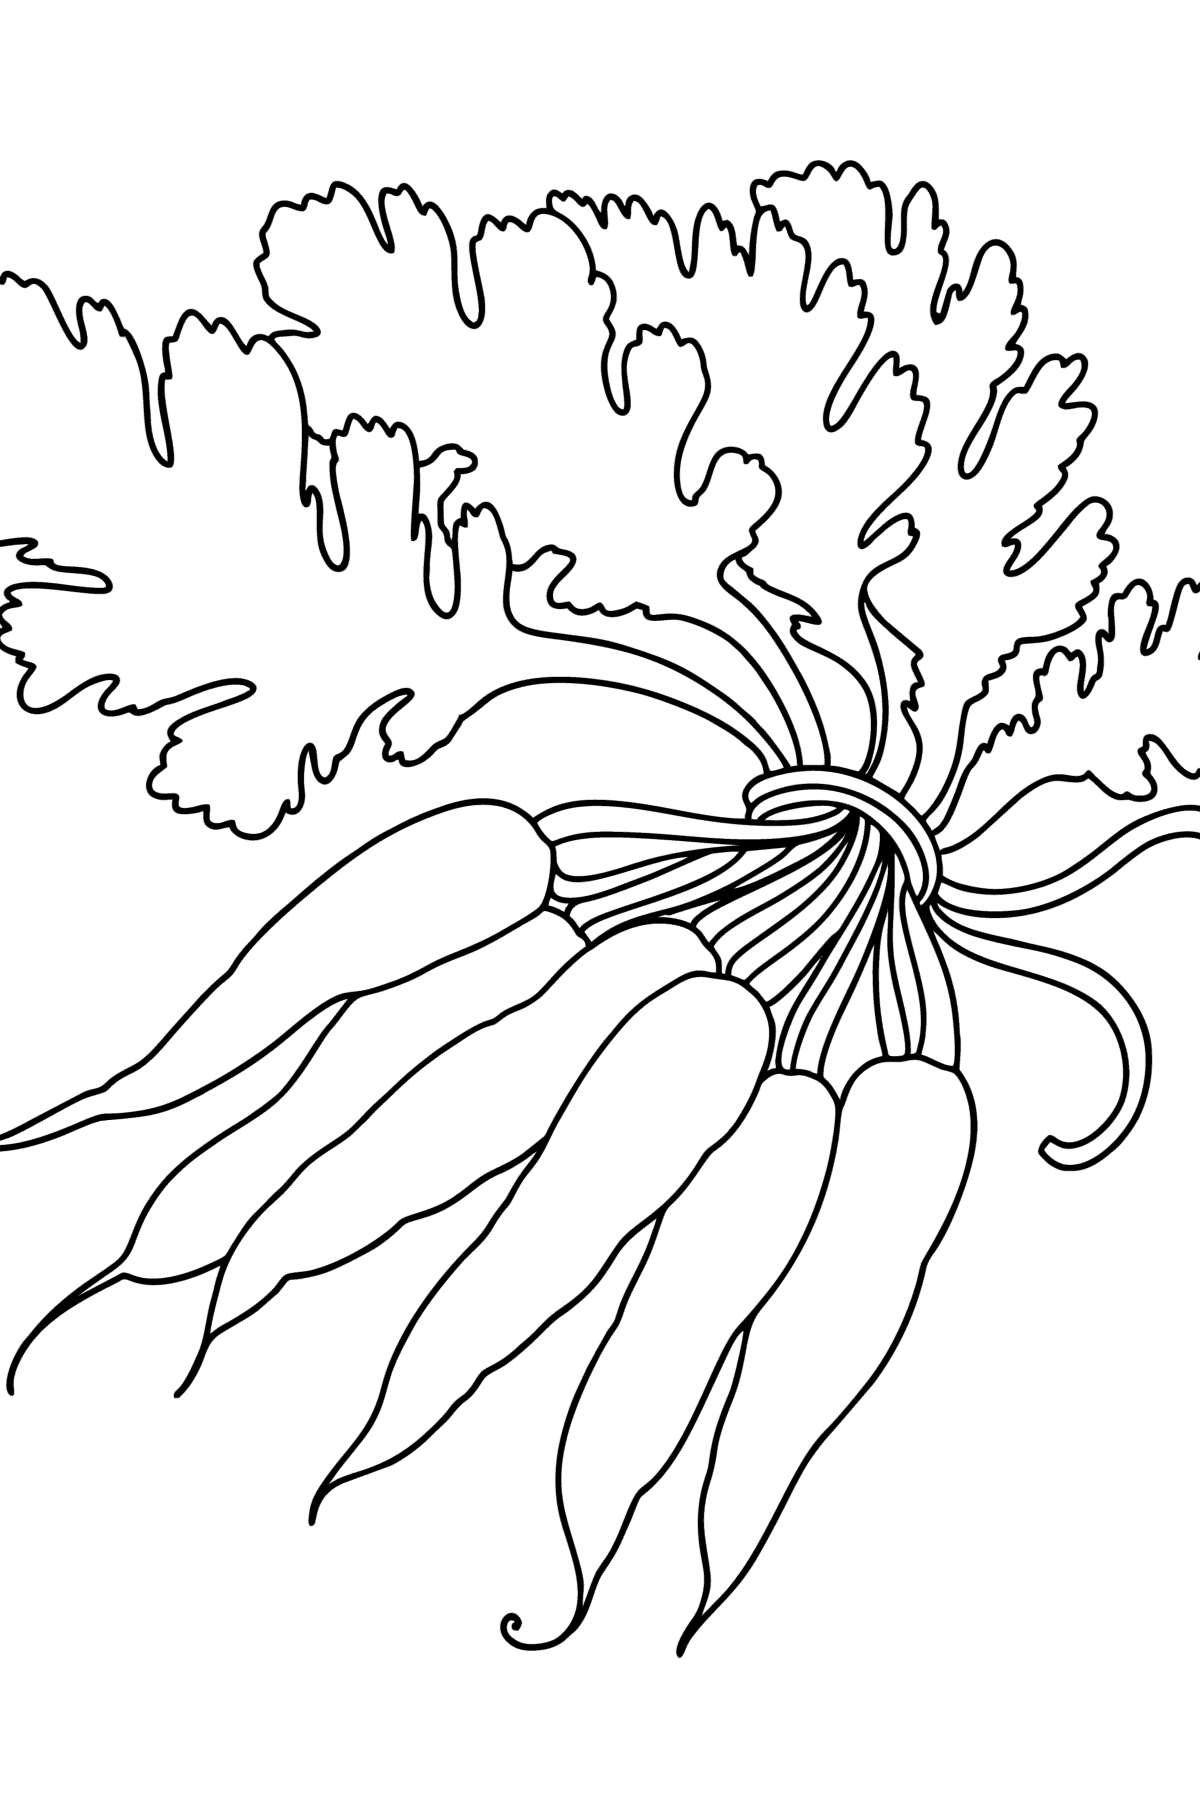 Bunch of carrots сoloring page - Coloring Pages for Kids